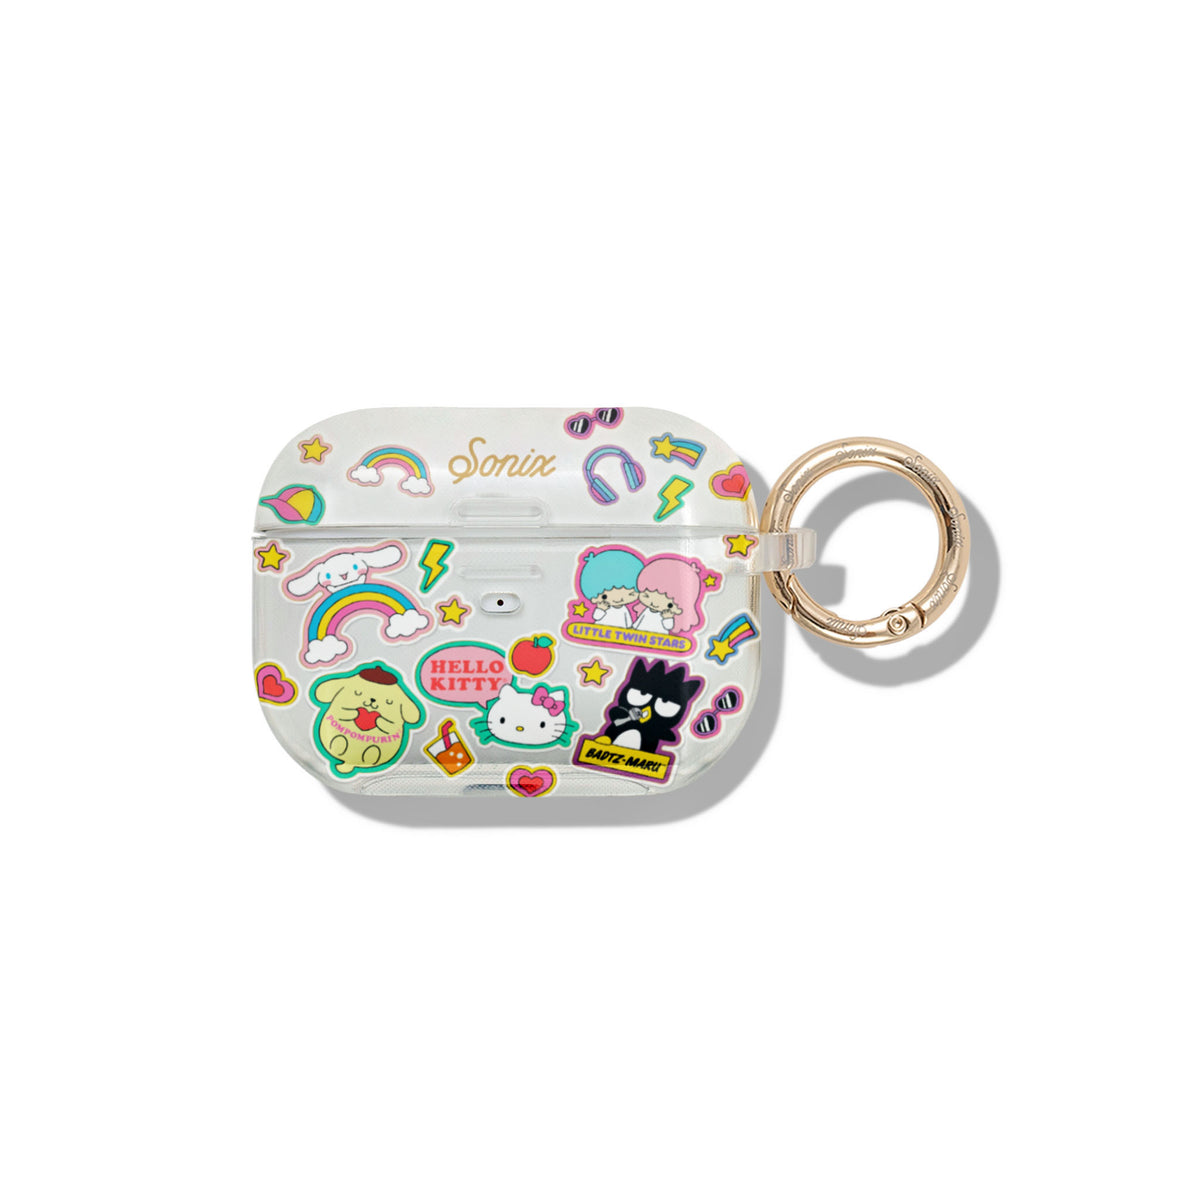 Foldable iPad Sleeve - Hello Kitty and Friends Stickers by Sonix